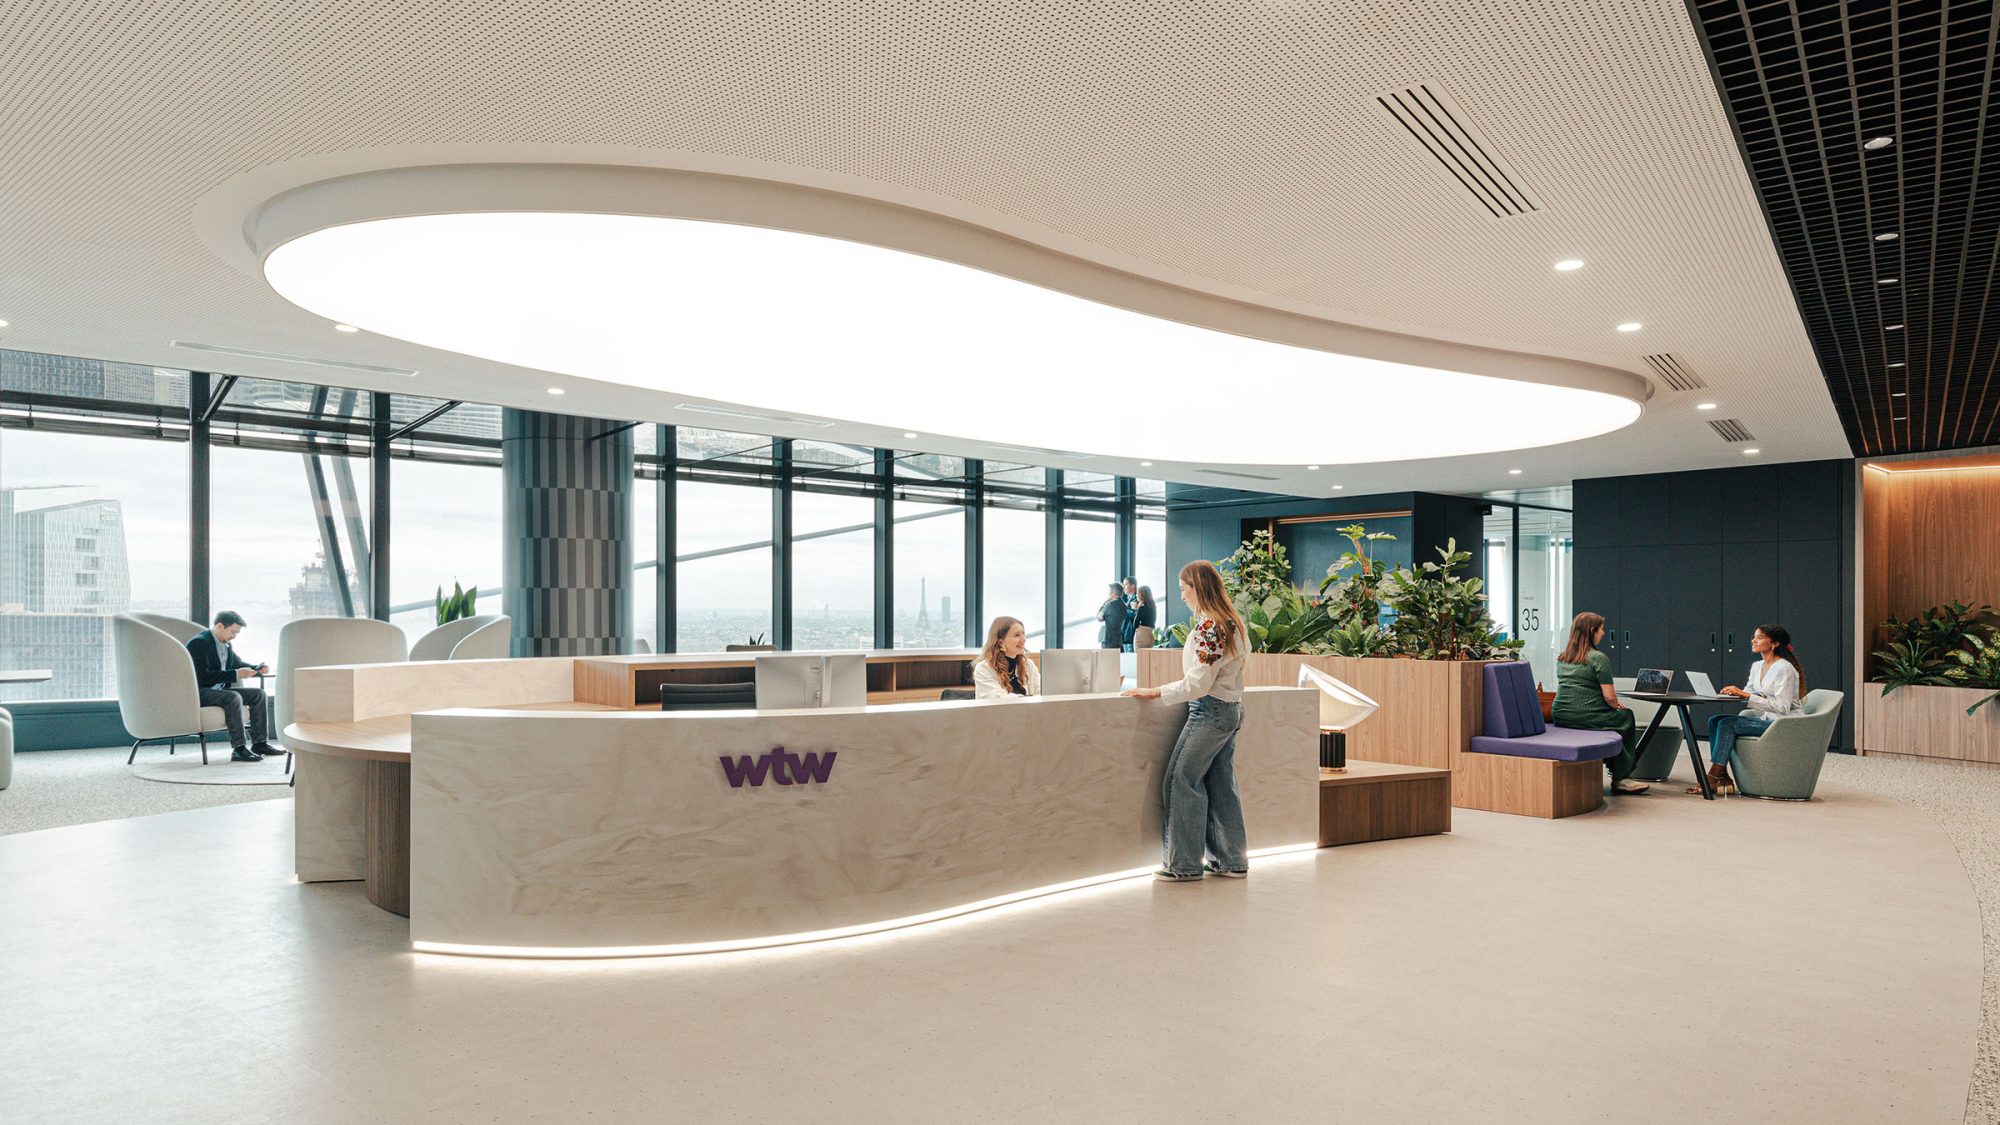 large-arrival-lounge-with-logo-on-reception-desk-at-wtw-paris-office